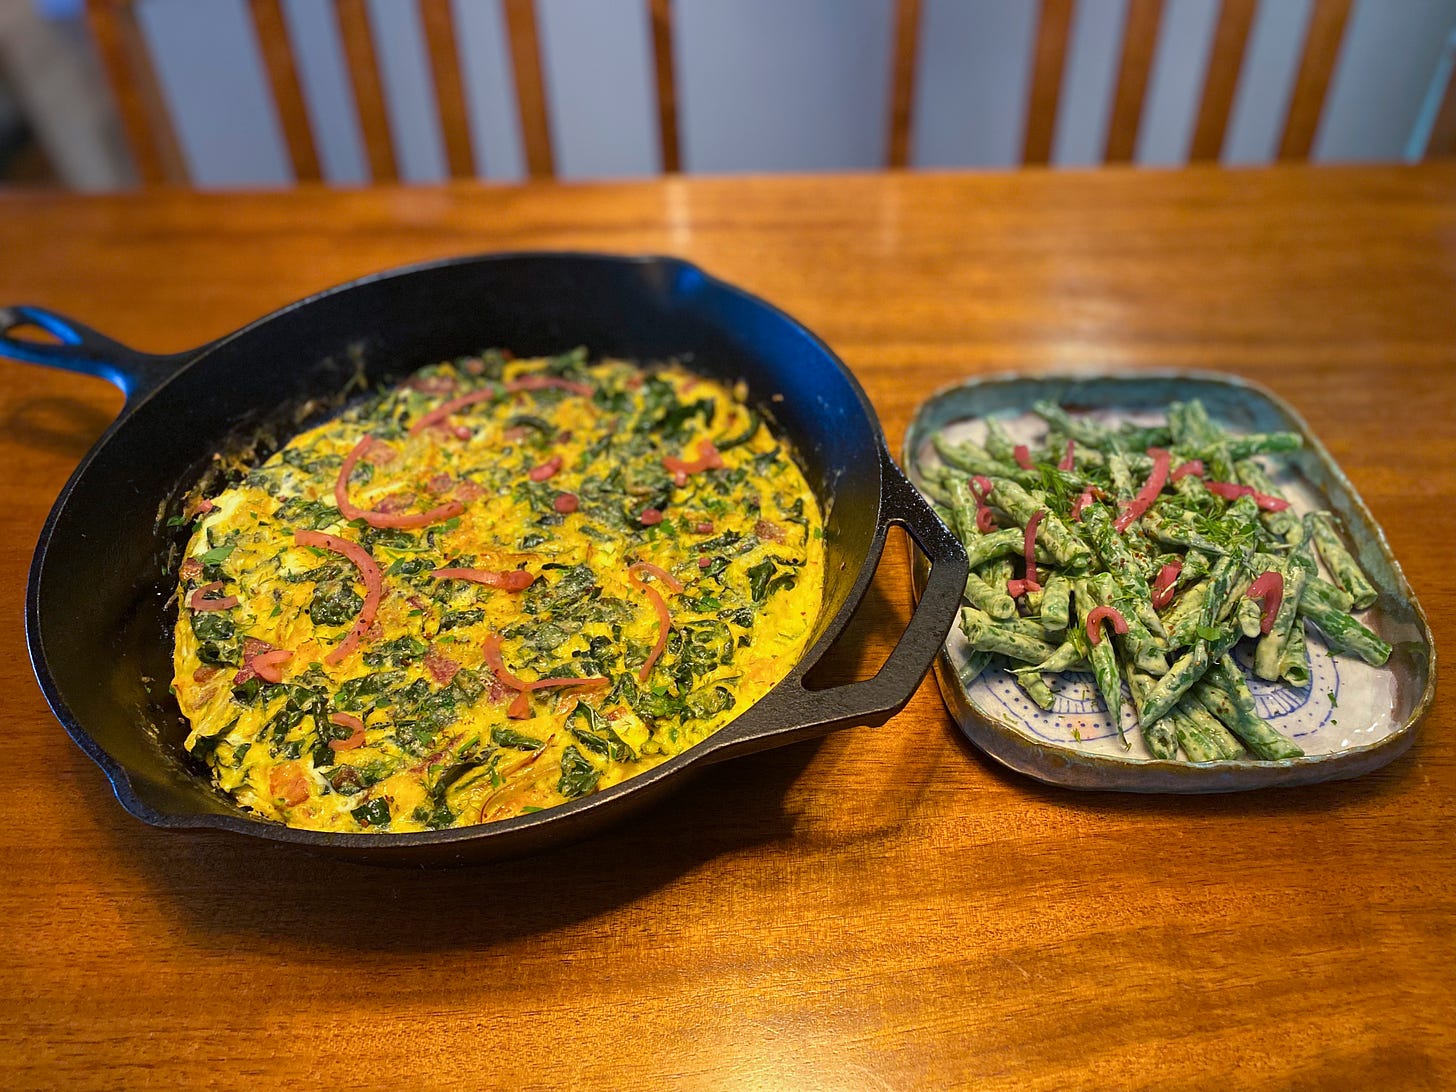 A large cast iron pan with the frittata described above, with parsley, dill, and pickled red onion over top. Next to it is a small blue ceramic dish with the green bean salad described above, also garnished with the herbs and onion.